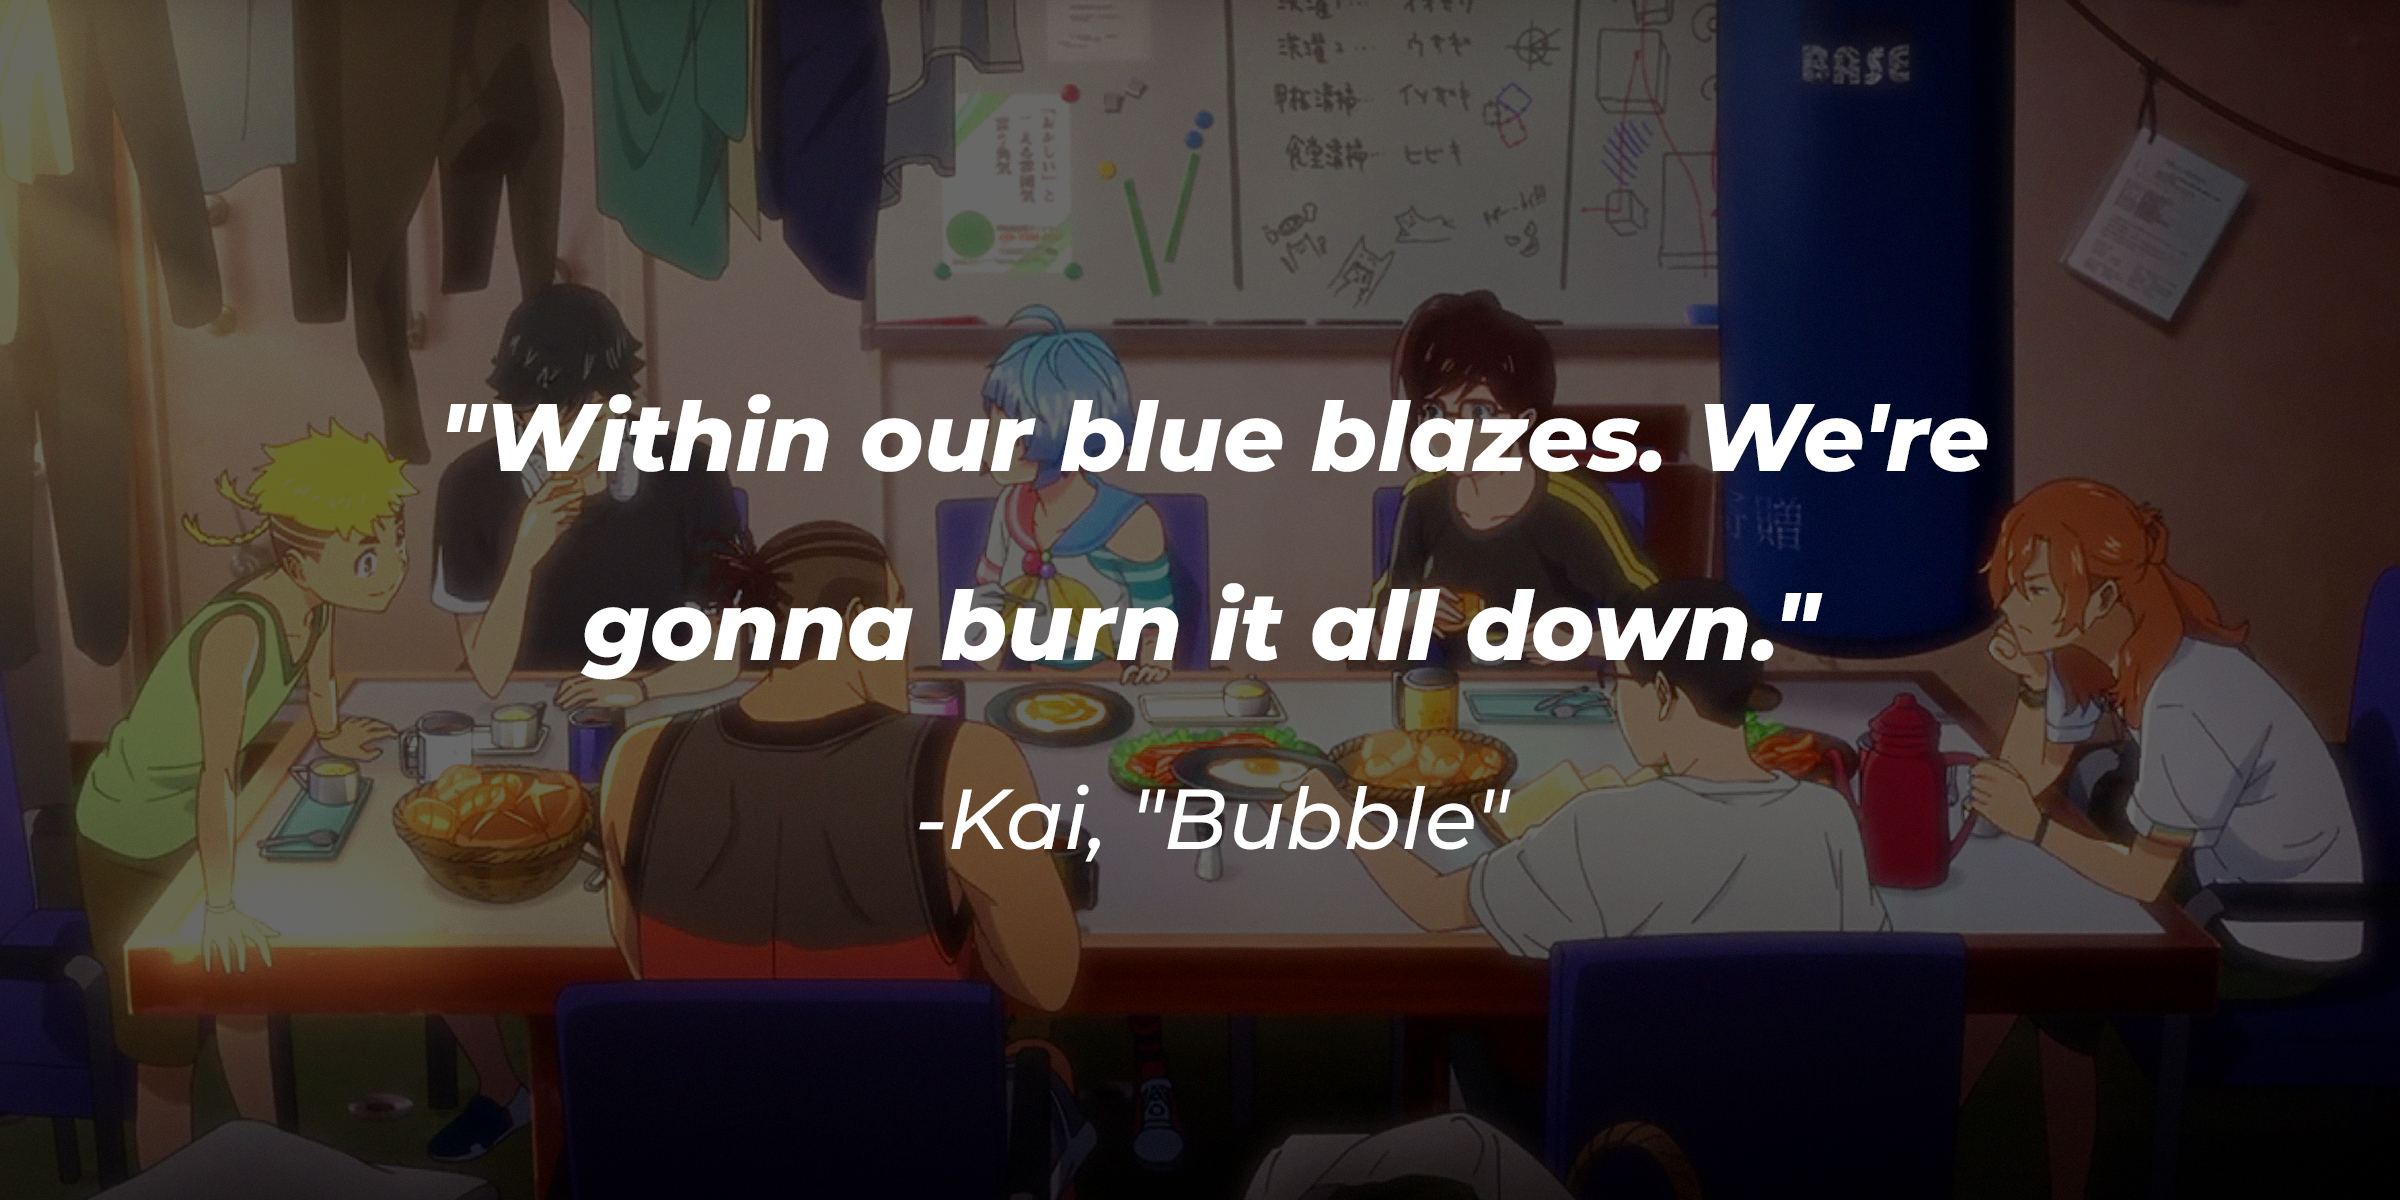 A scene from "Bubble" with Kai's quote: "Within our blue blazes. We're gonna burn it all down." | Source: Youtube.com/netflixanime